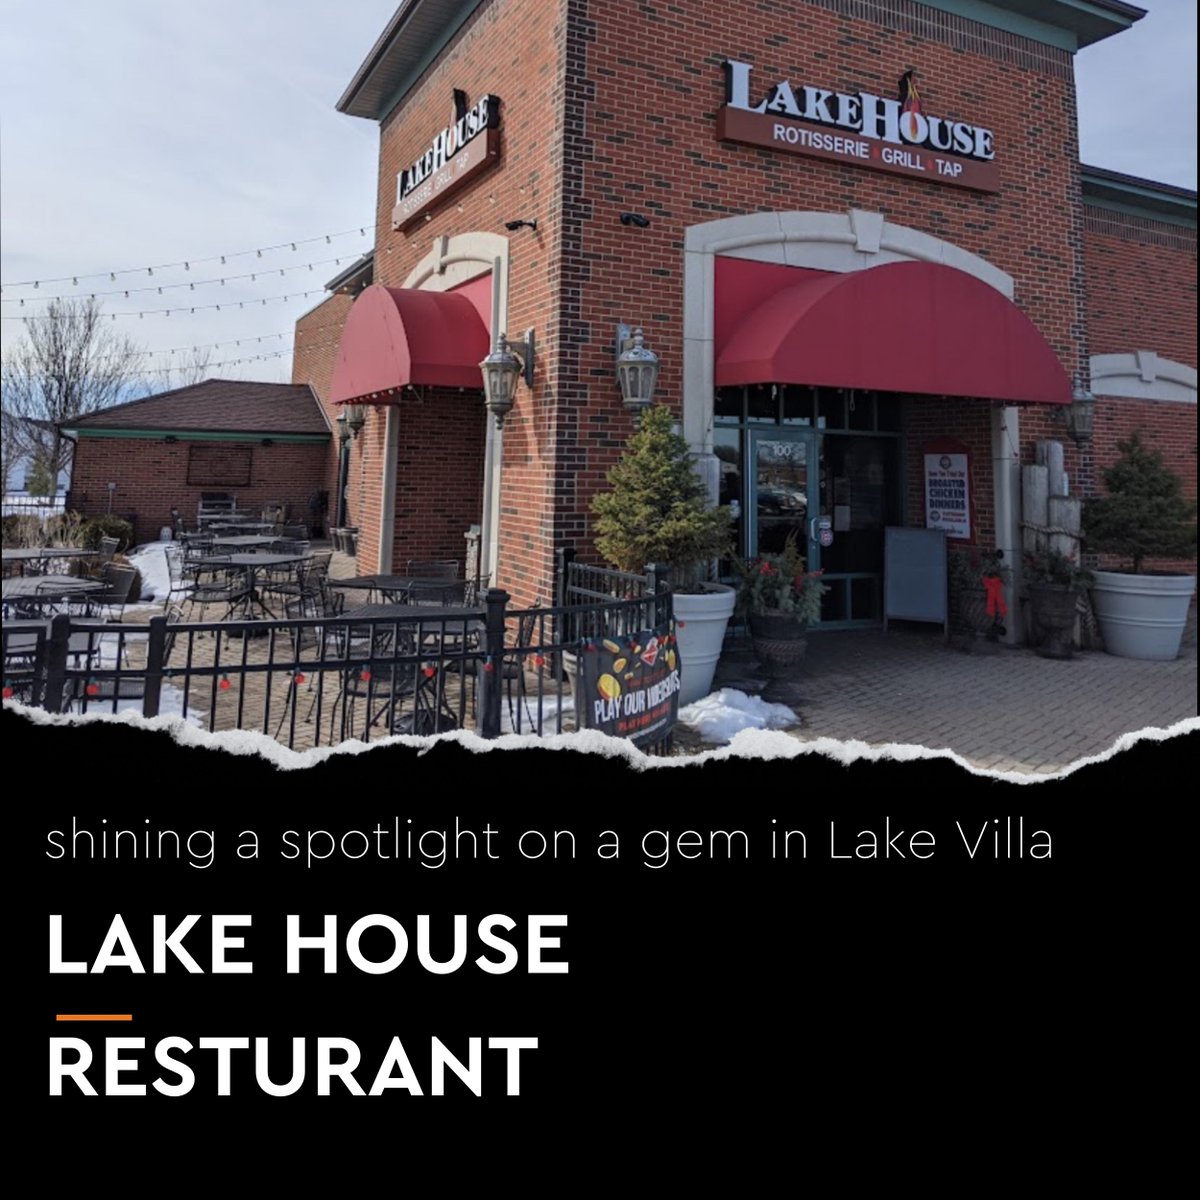 Elevate your dining experience at Lake House Restaurant, where every dish tells a story of culinary excellence. 

Join us in Lake Villa for a taste of local splendor.”

#LakeHouseRestaurant #LakeVillaDining #GourmetExperience #ProfessionalEats #CulinaryExcellence#LocalCuisine#...